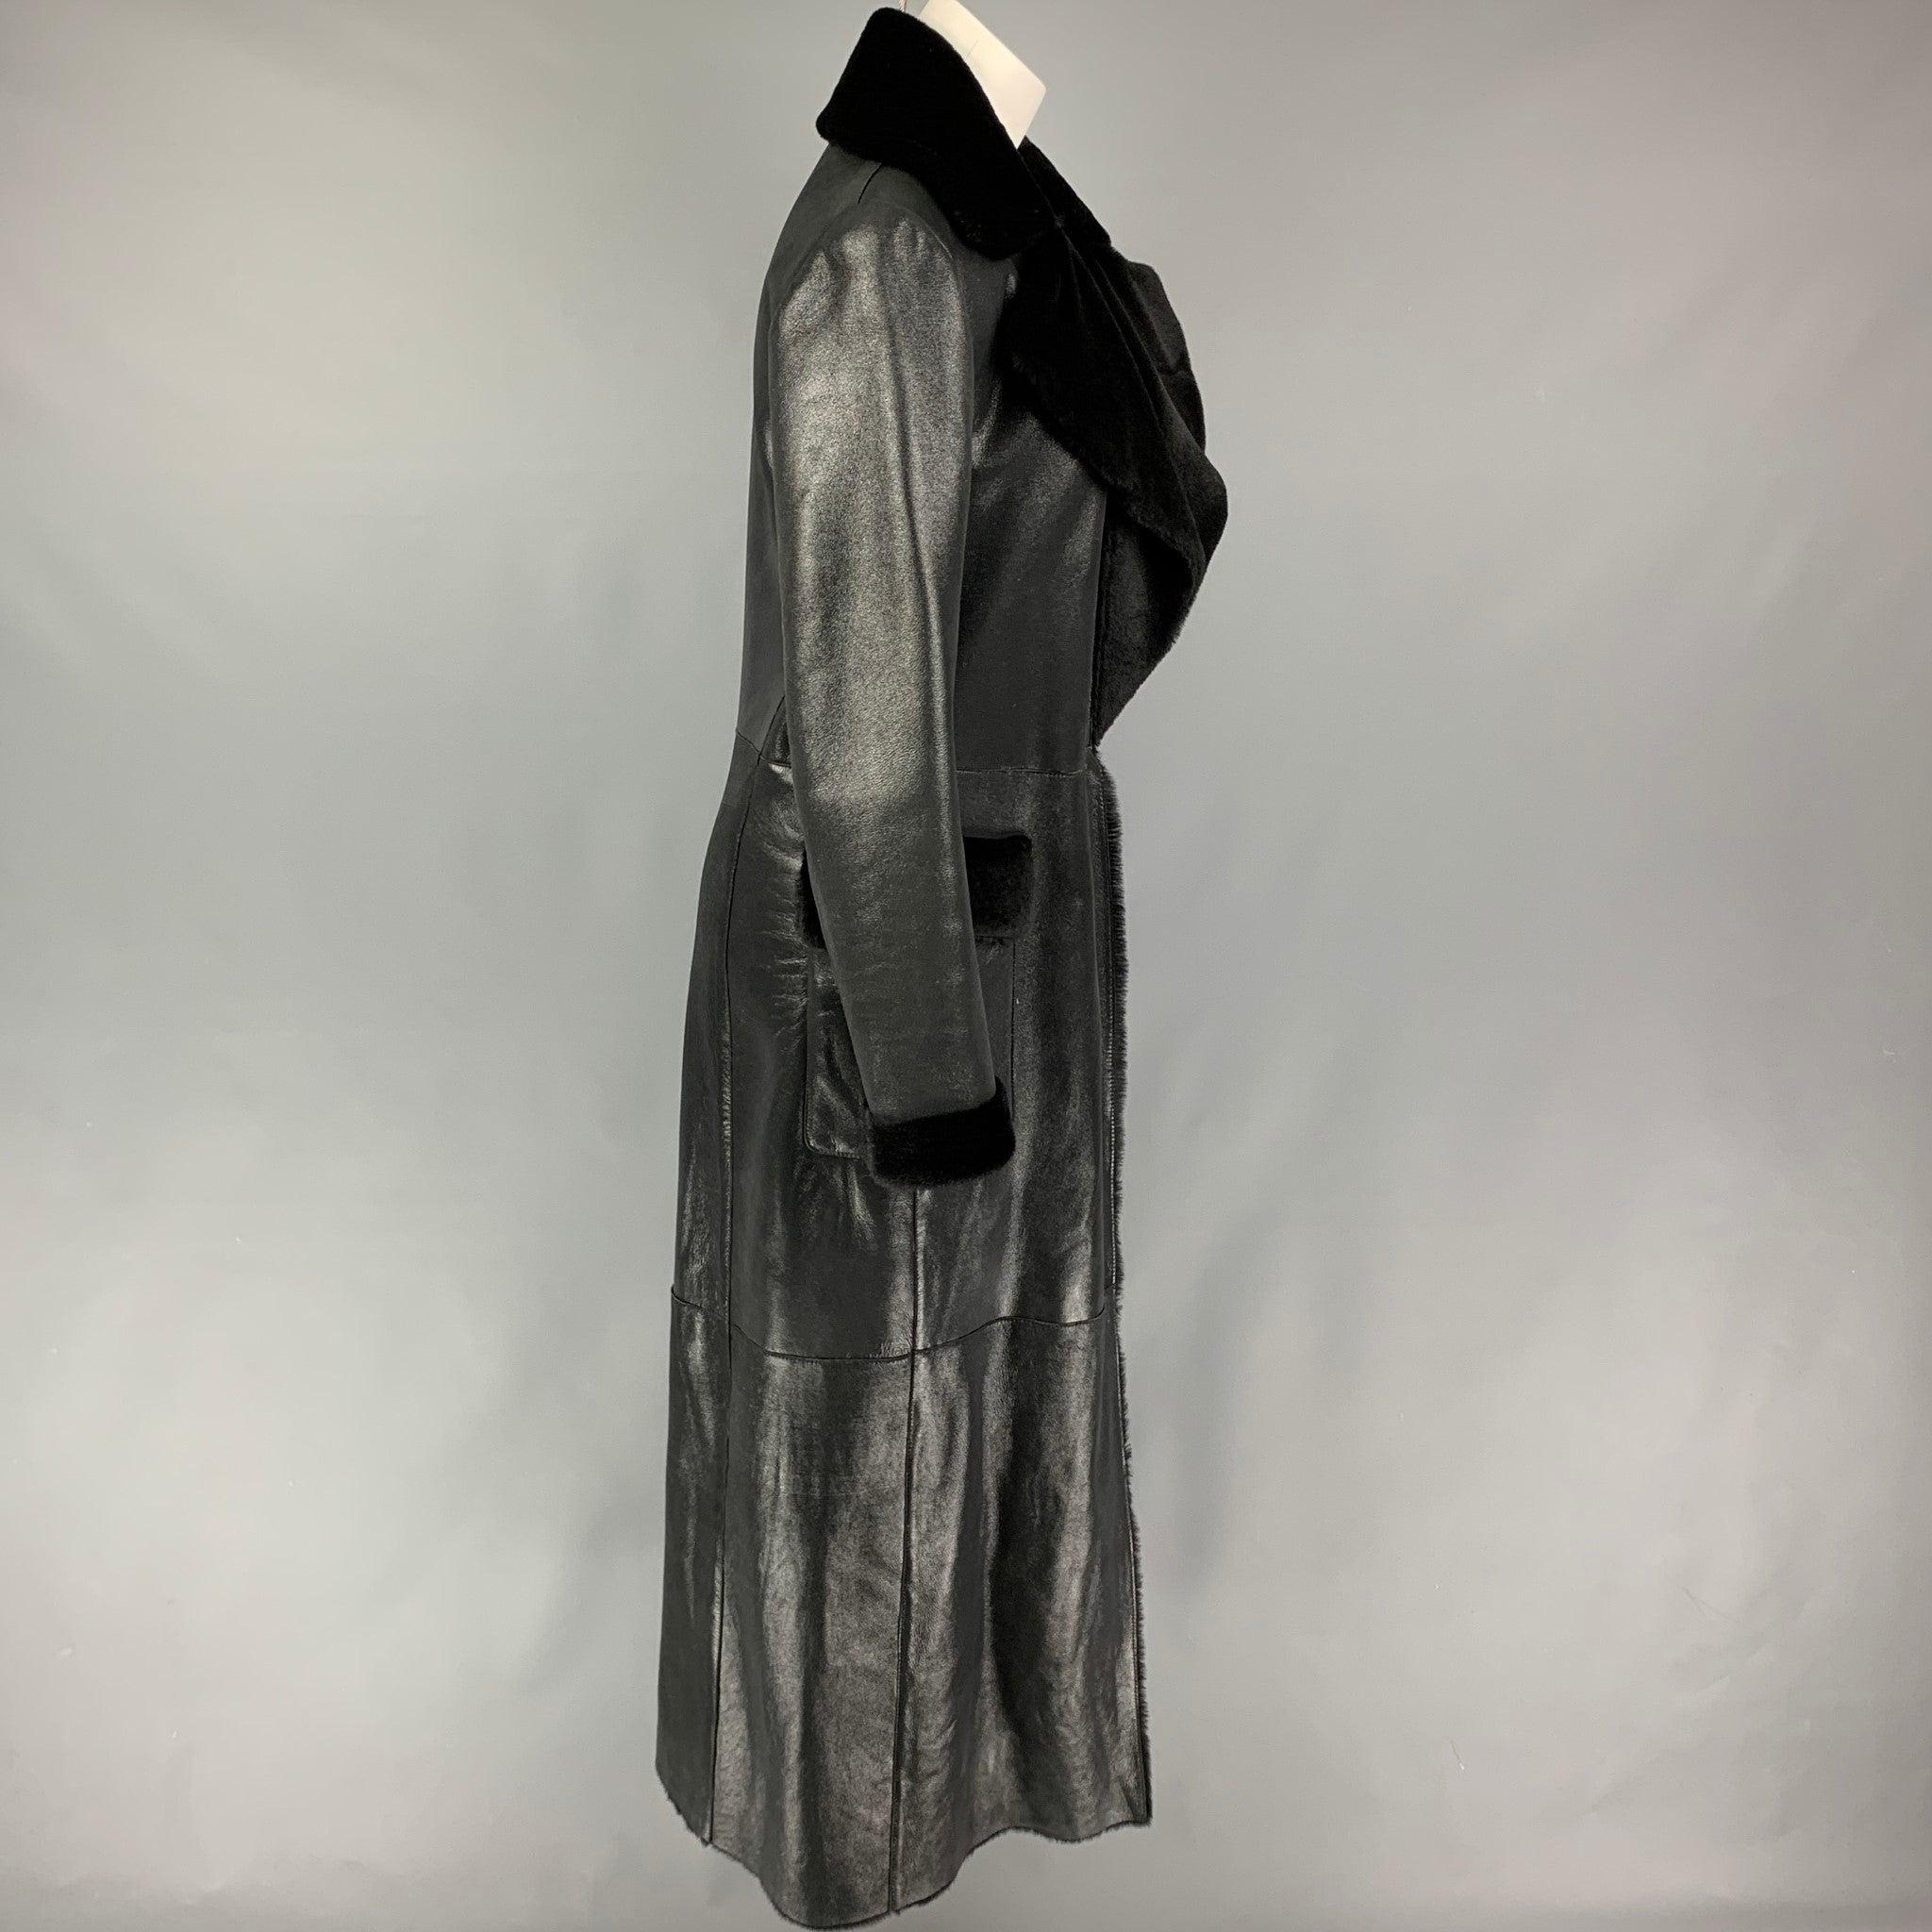 VALENTINO coat comes in a black shiny lamb shearling featuring a large lapel, flap pockets, fur trim, and a hook & eye closure. Made in Italy.
Very Good
Pre-Owned Condition. 

Marked:  10 

Measurements: 
 
Shoulder: 16.5 inches Bust: 38 inches